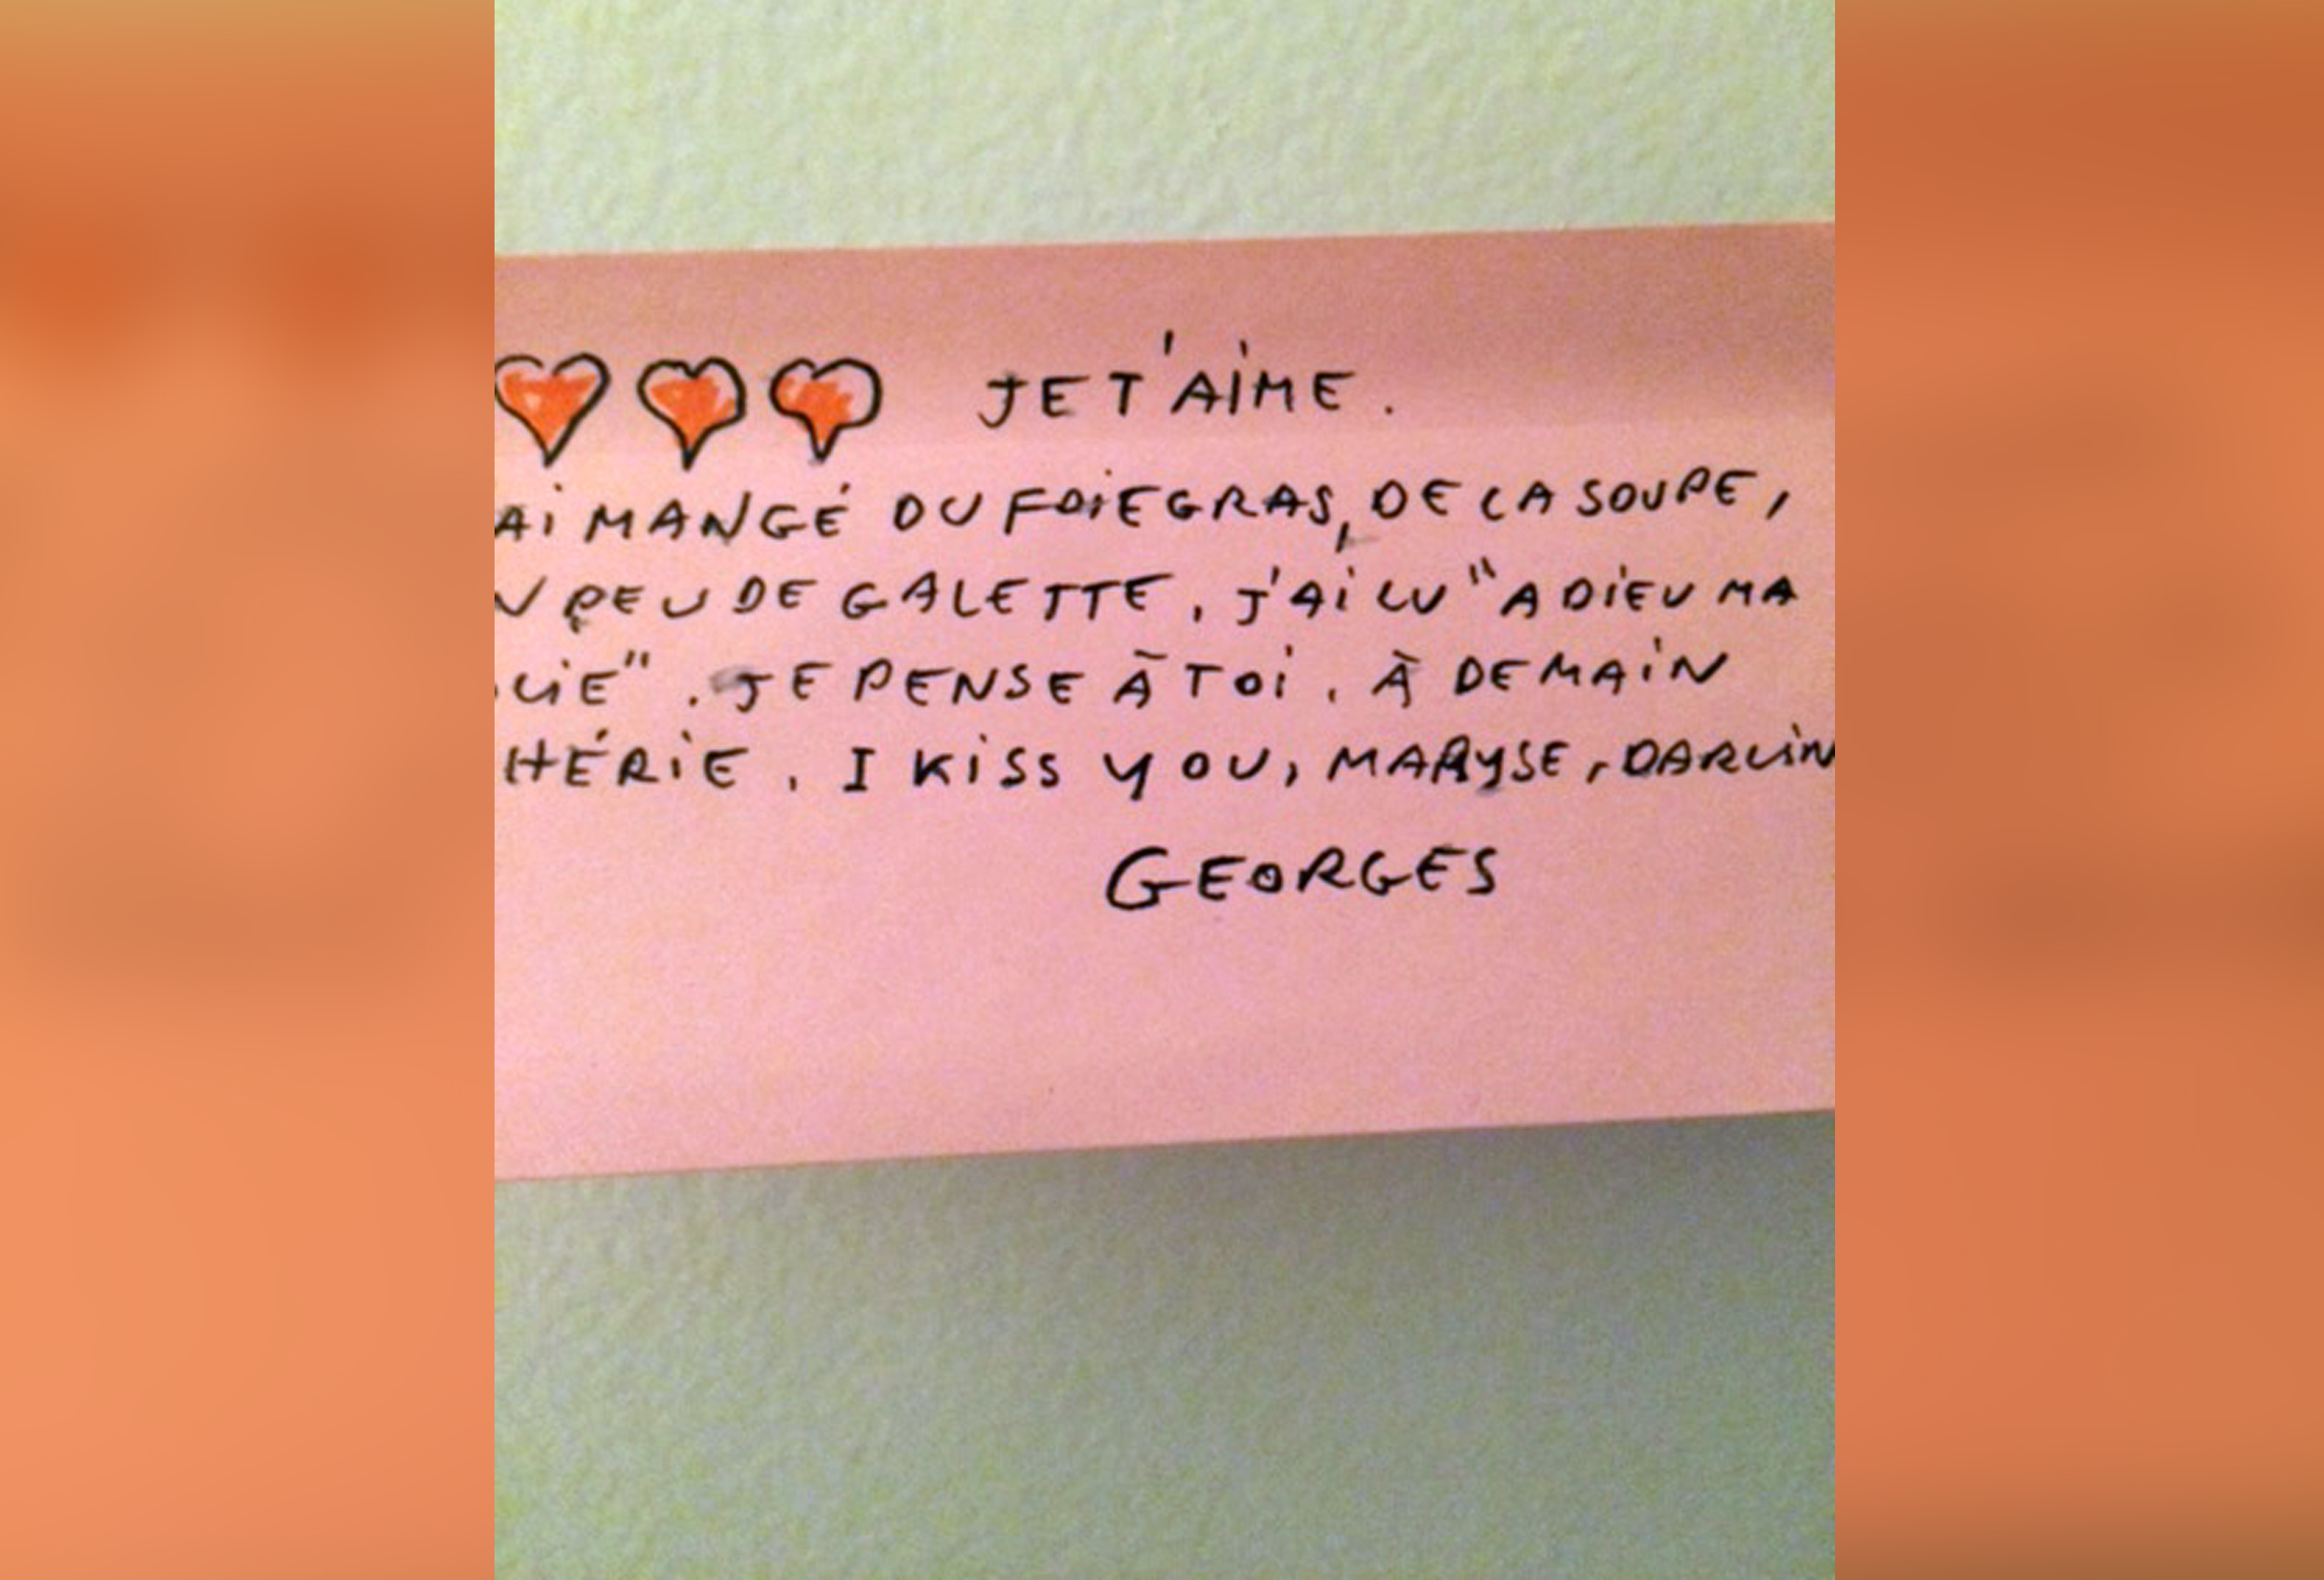 PHOTO: A note written by Georges Wolinski for his wife Maryse reads, "I love you. I have eaten some foie gras, some soup, a bit of galette. I am thinking of you. Until tomorrow my dear. I kiss you Maryse, darling. Georges."